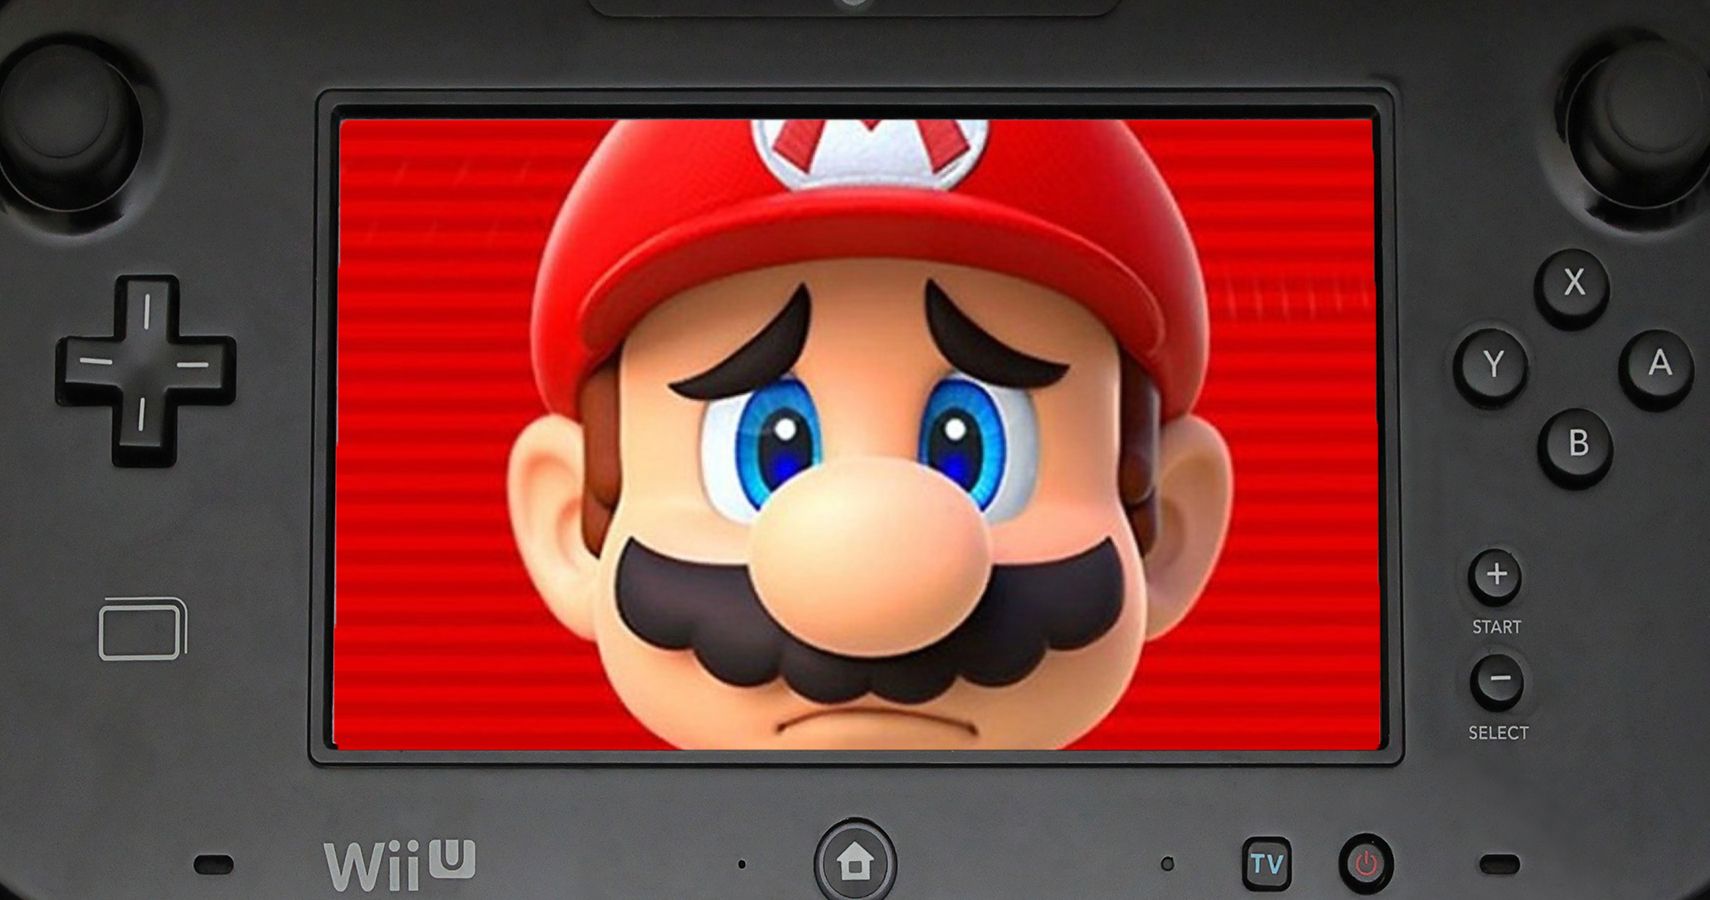 Here's Why Nintendo's Troubled Console Wii U Failed